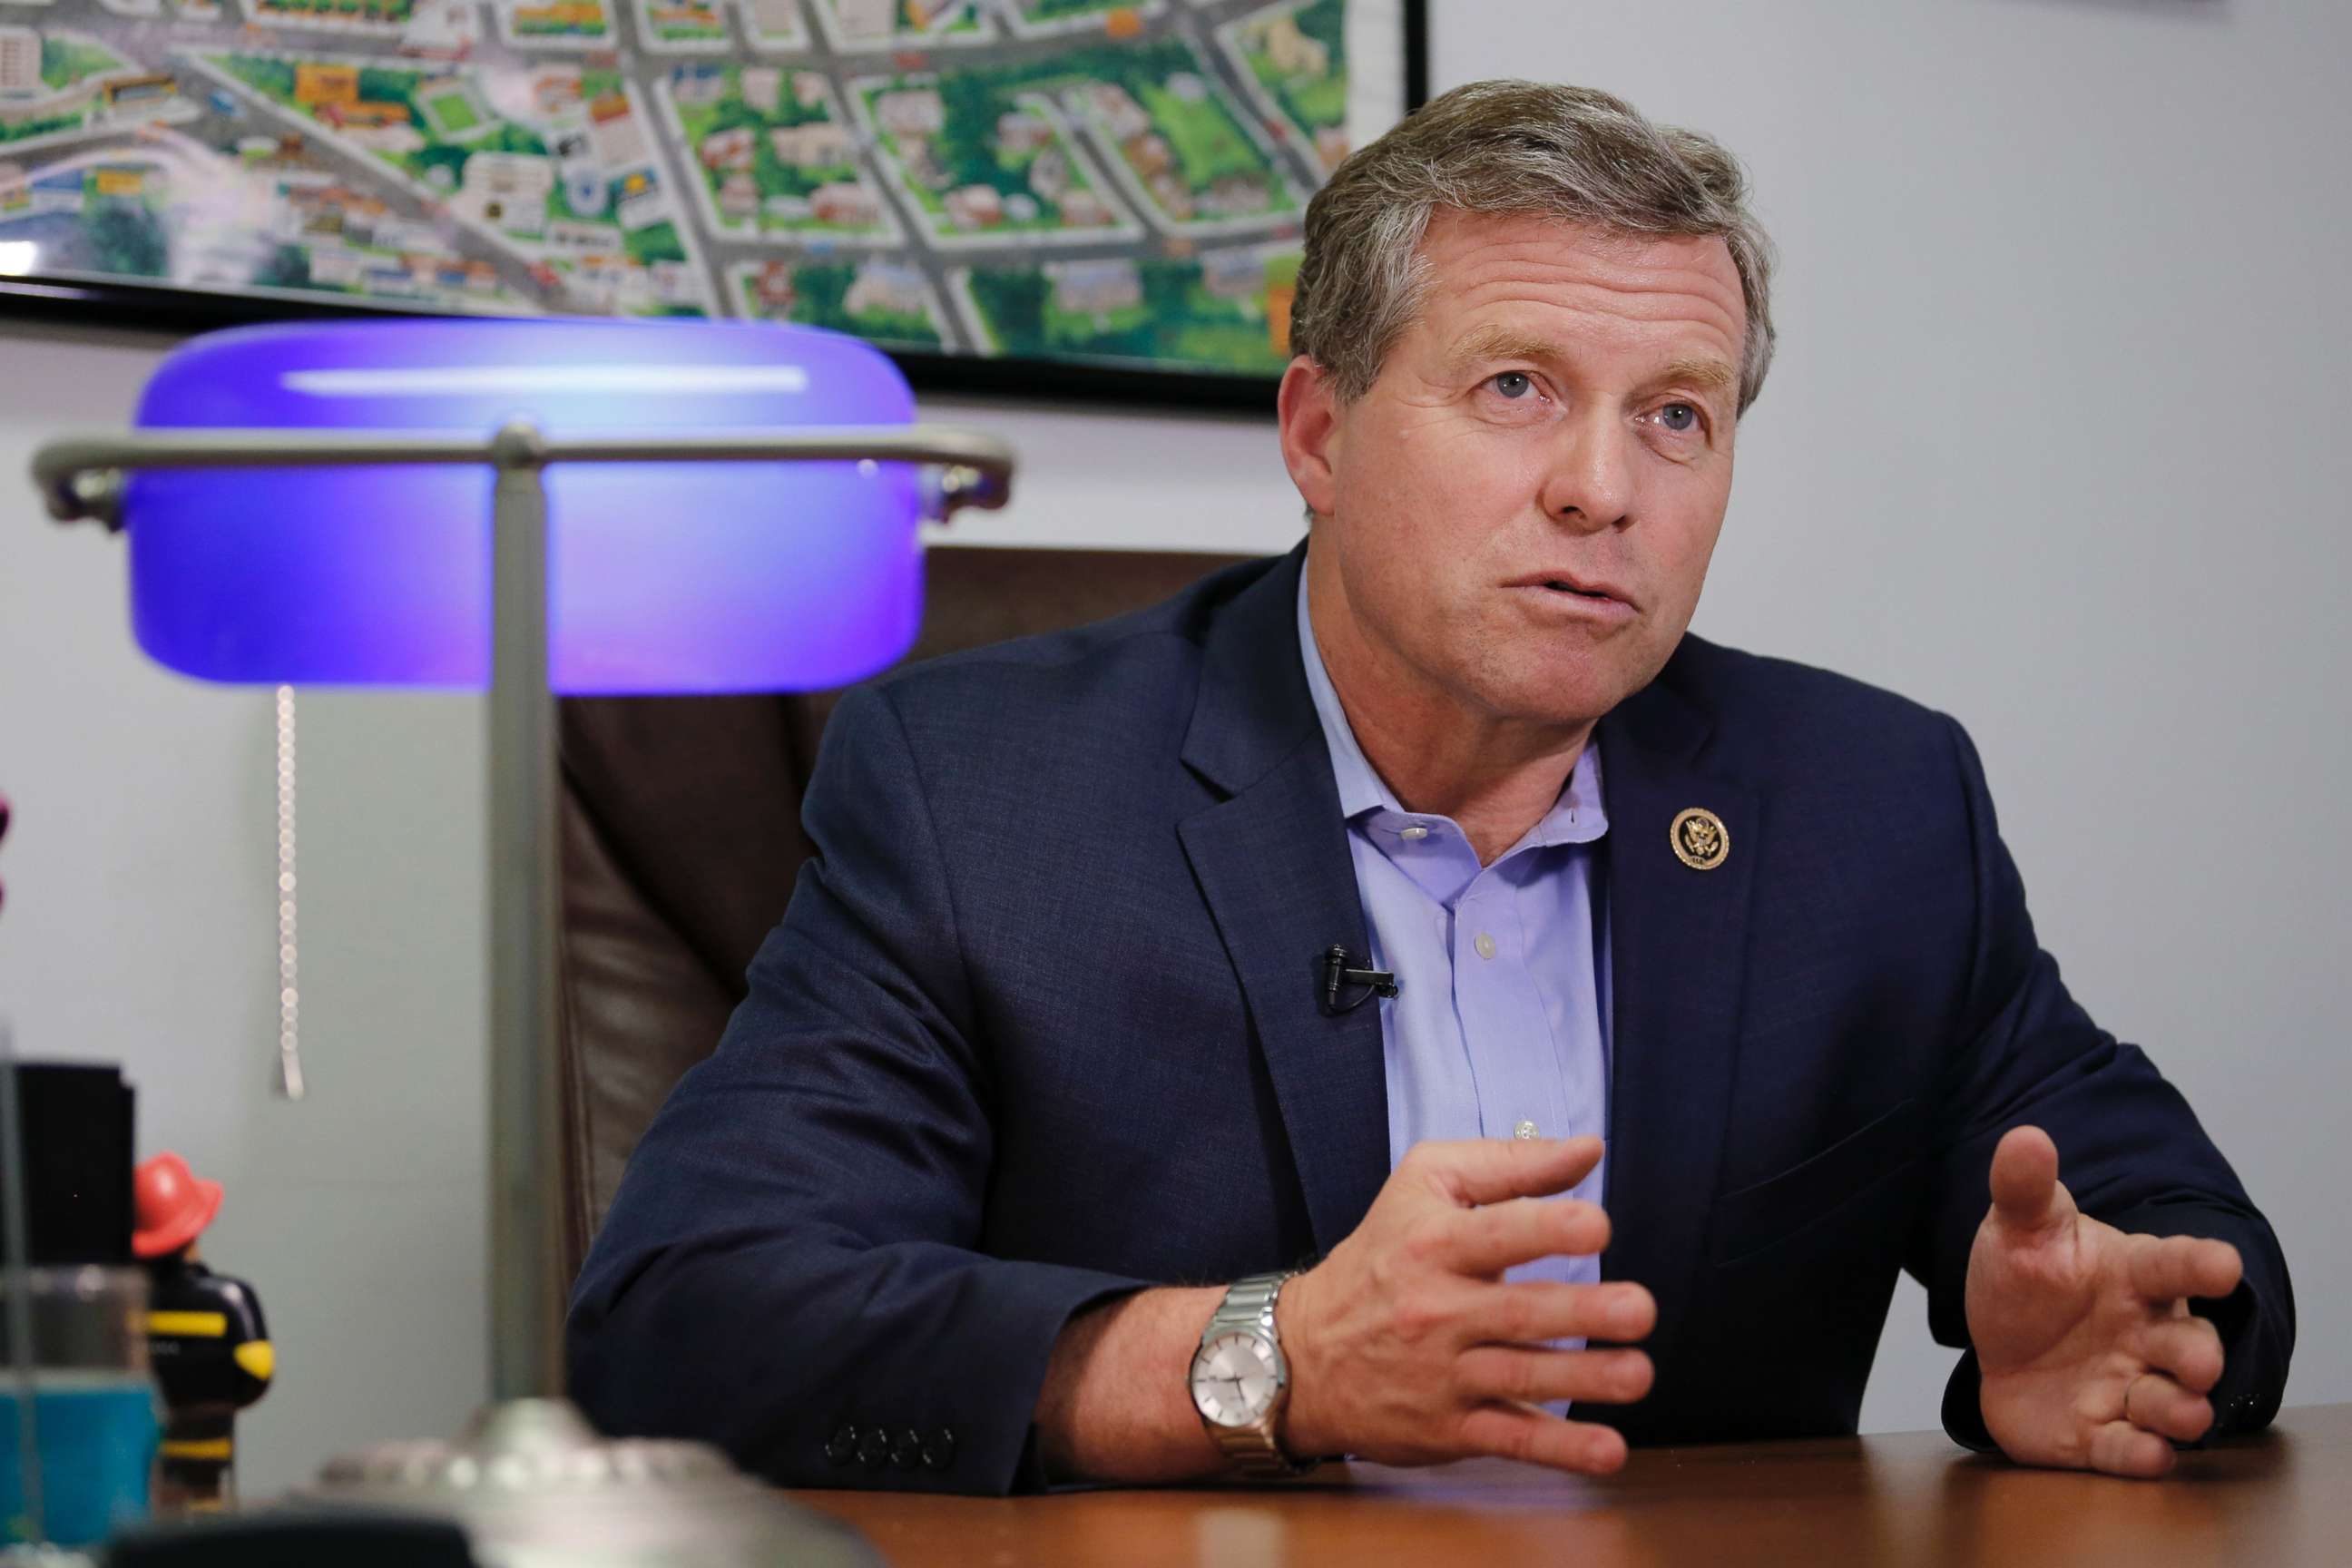 PHOTO: Rep. Charlie Dent speaks during an interview at his campaign office in Allentown, Pa., Nov. 2, 2016.